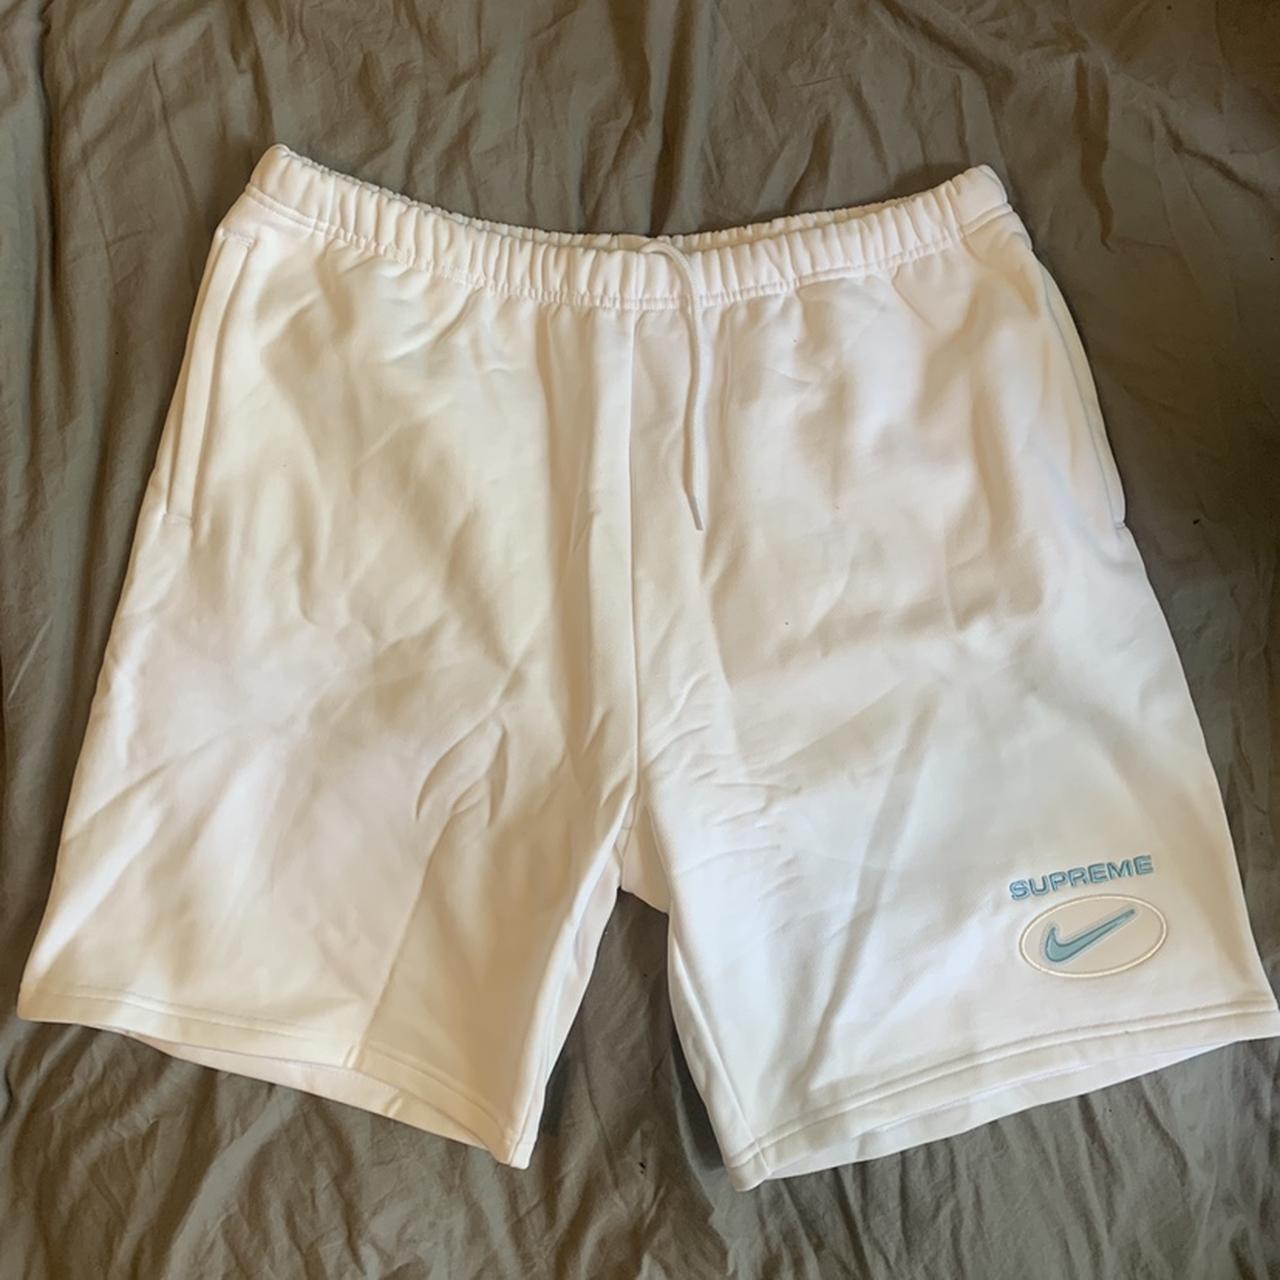 Supreme Nike Jewel shorts Brand new with tags.... - Depop